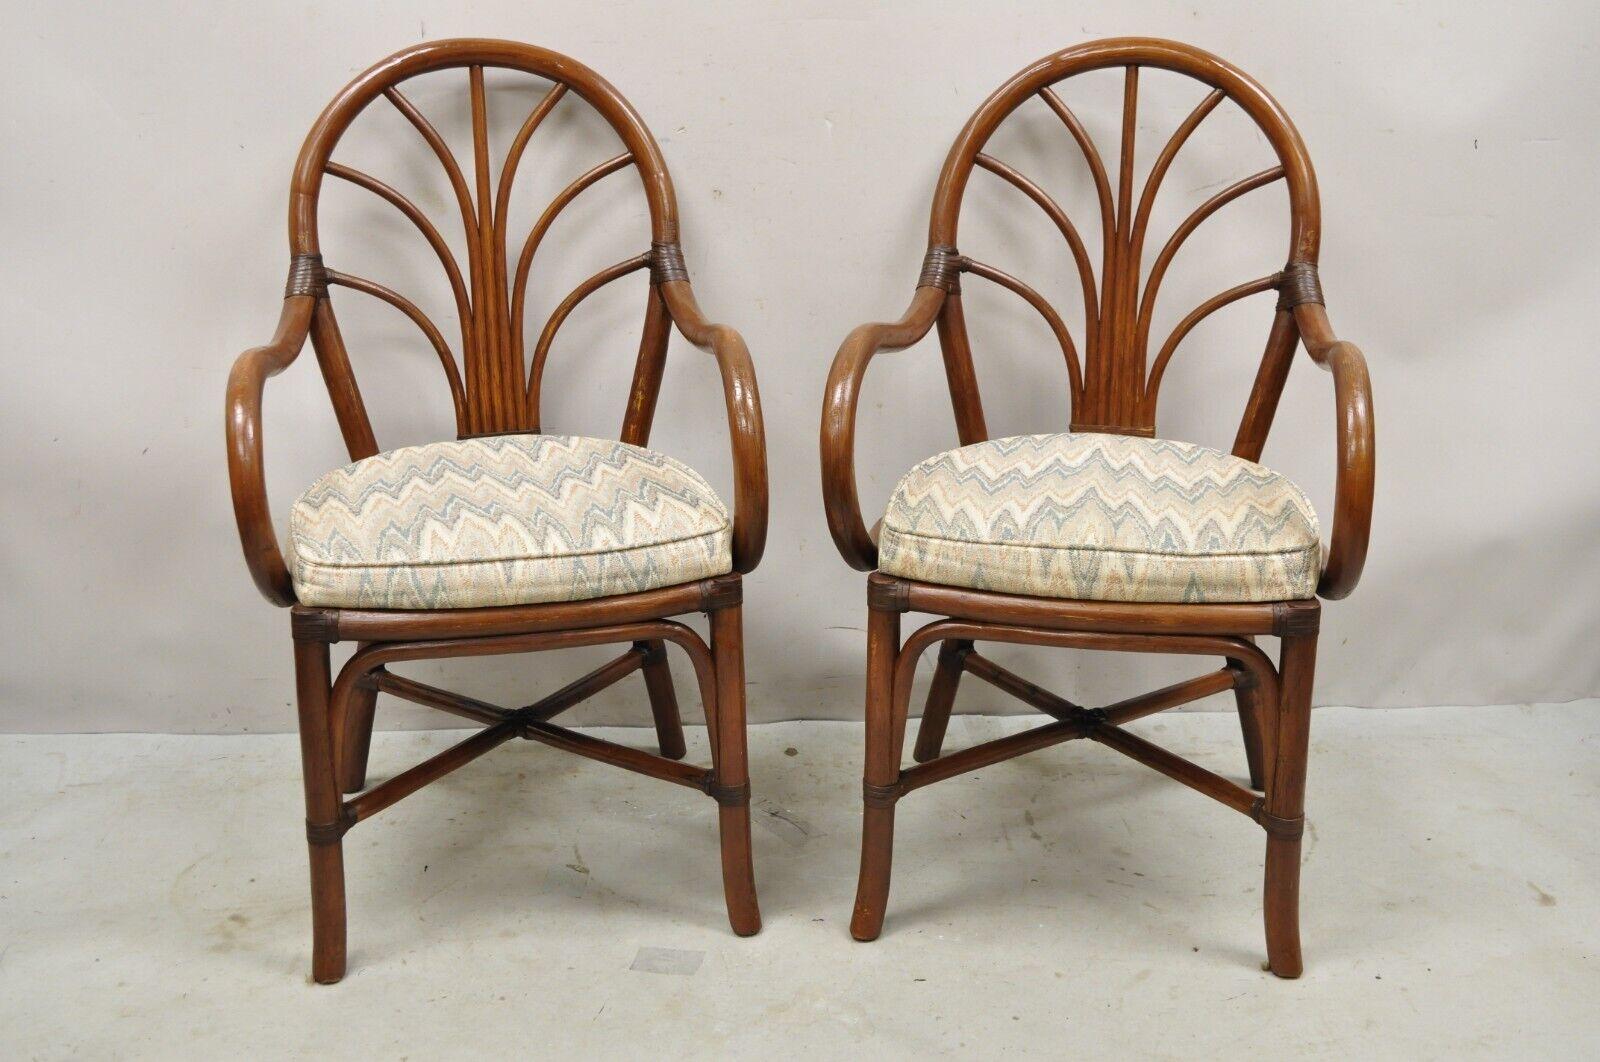 Vintage Bentwood Rattan Hollywood Regency Fan Back Dining Chairs - Set of 4 For Sale 6